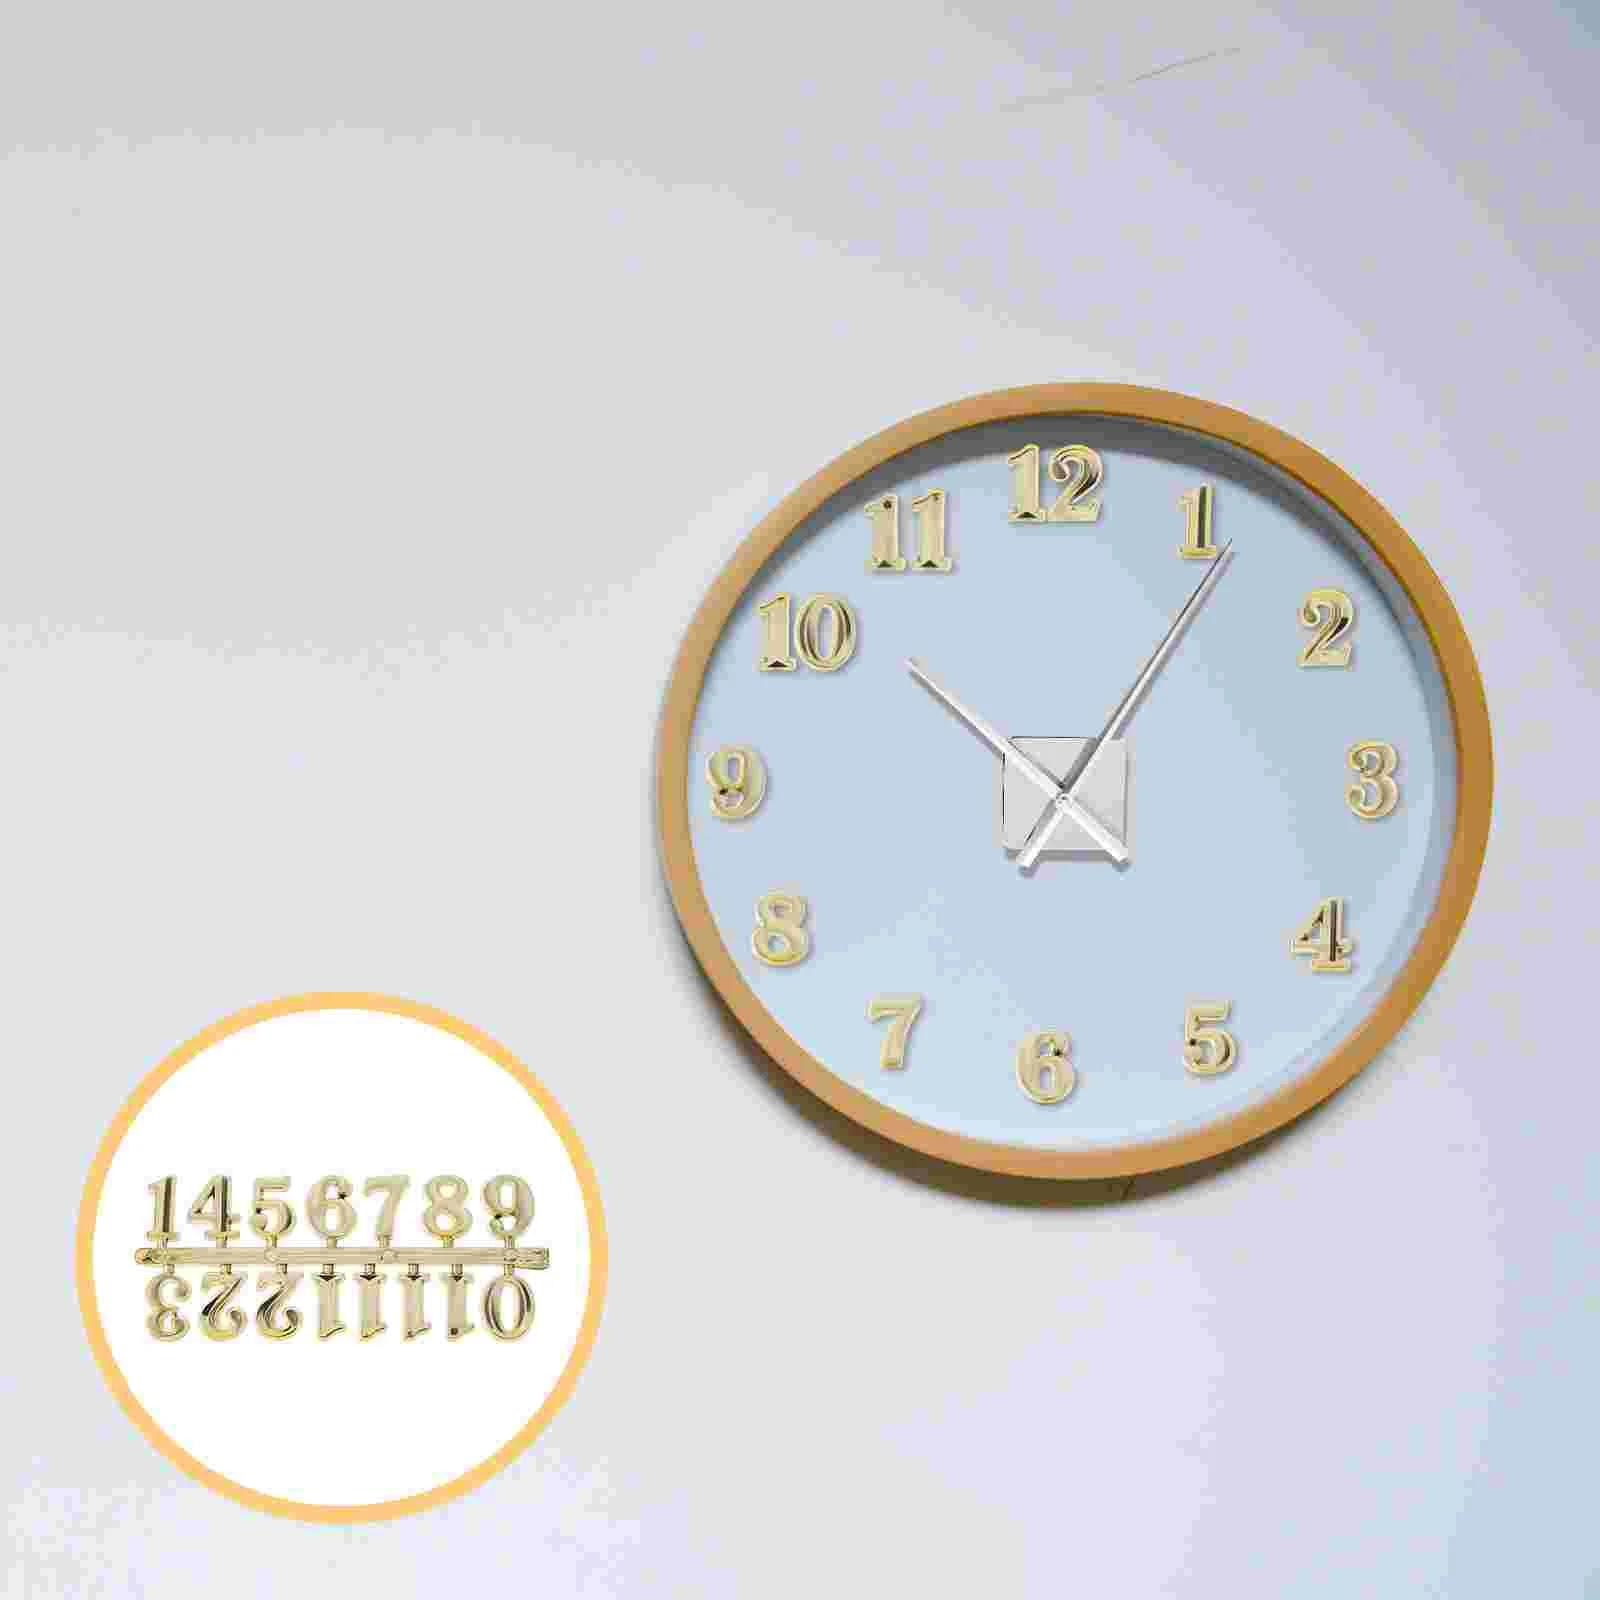 

5 Sets Decked Accessories Roman Numeral Wall Clock Face Numbers Time Clocks DIY Arabic Replace Plate